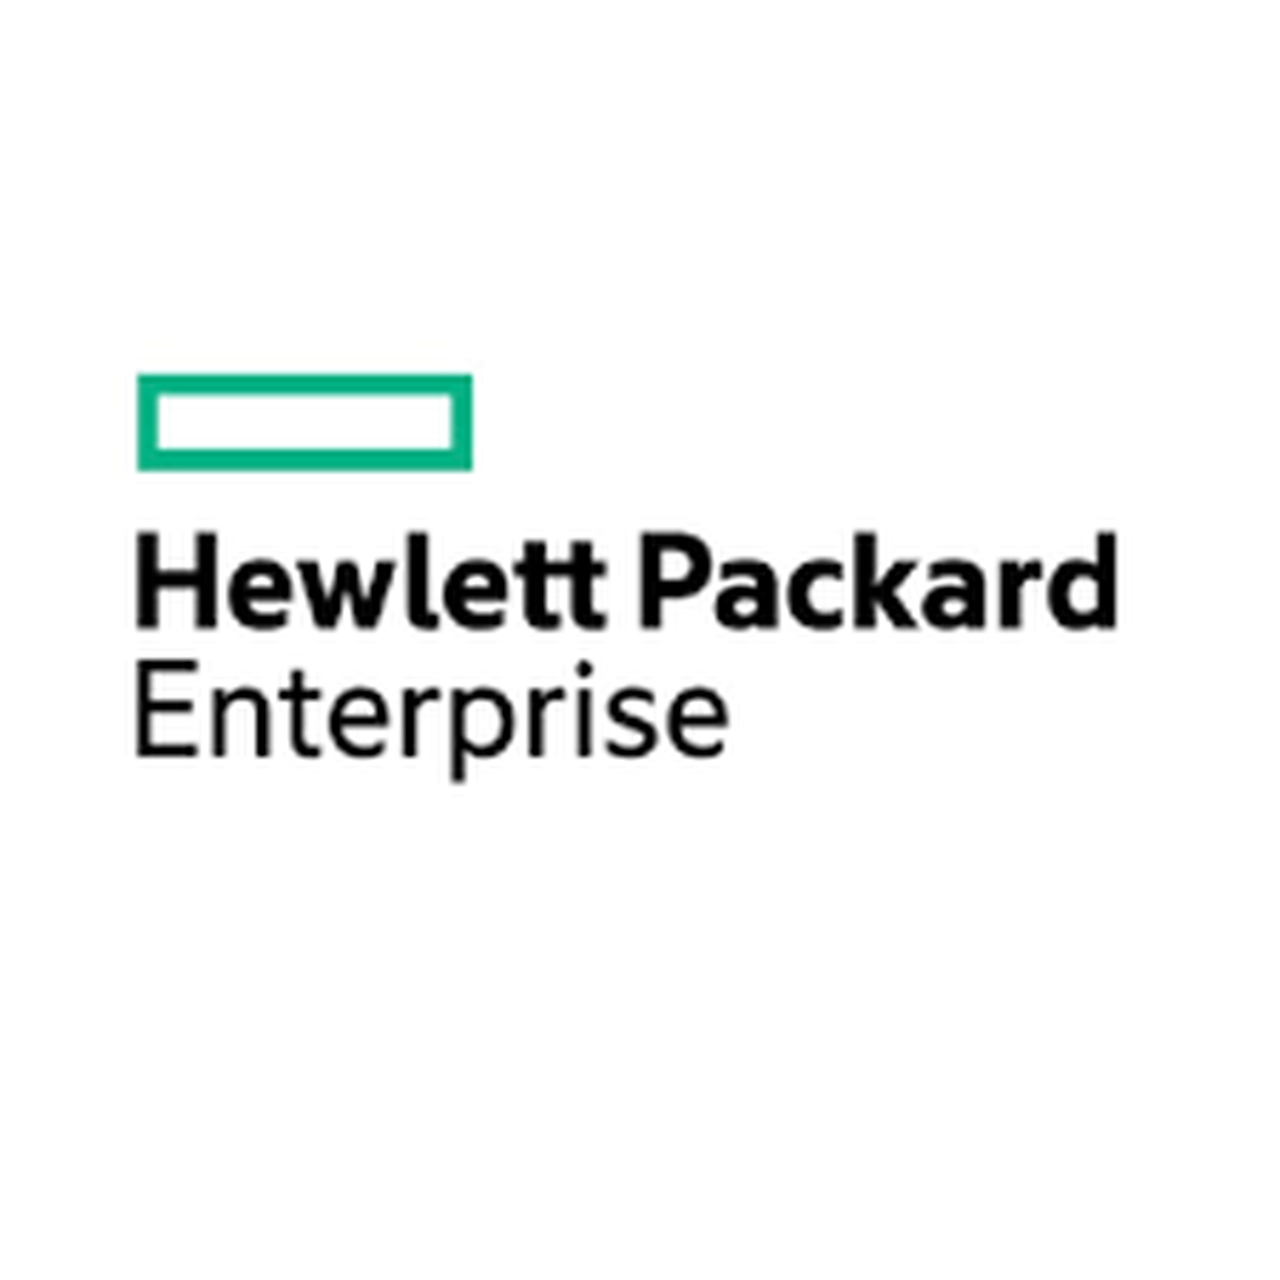 HPE 1606 Extension SAN Pwr Pack+ Switch Europe - English localization